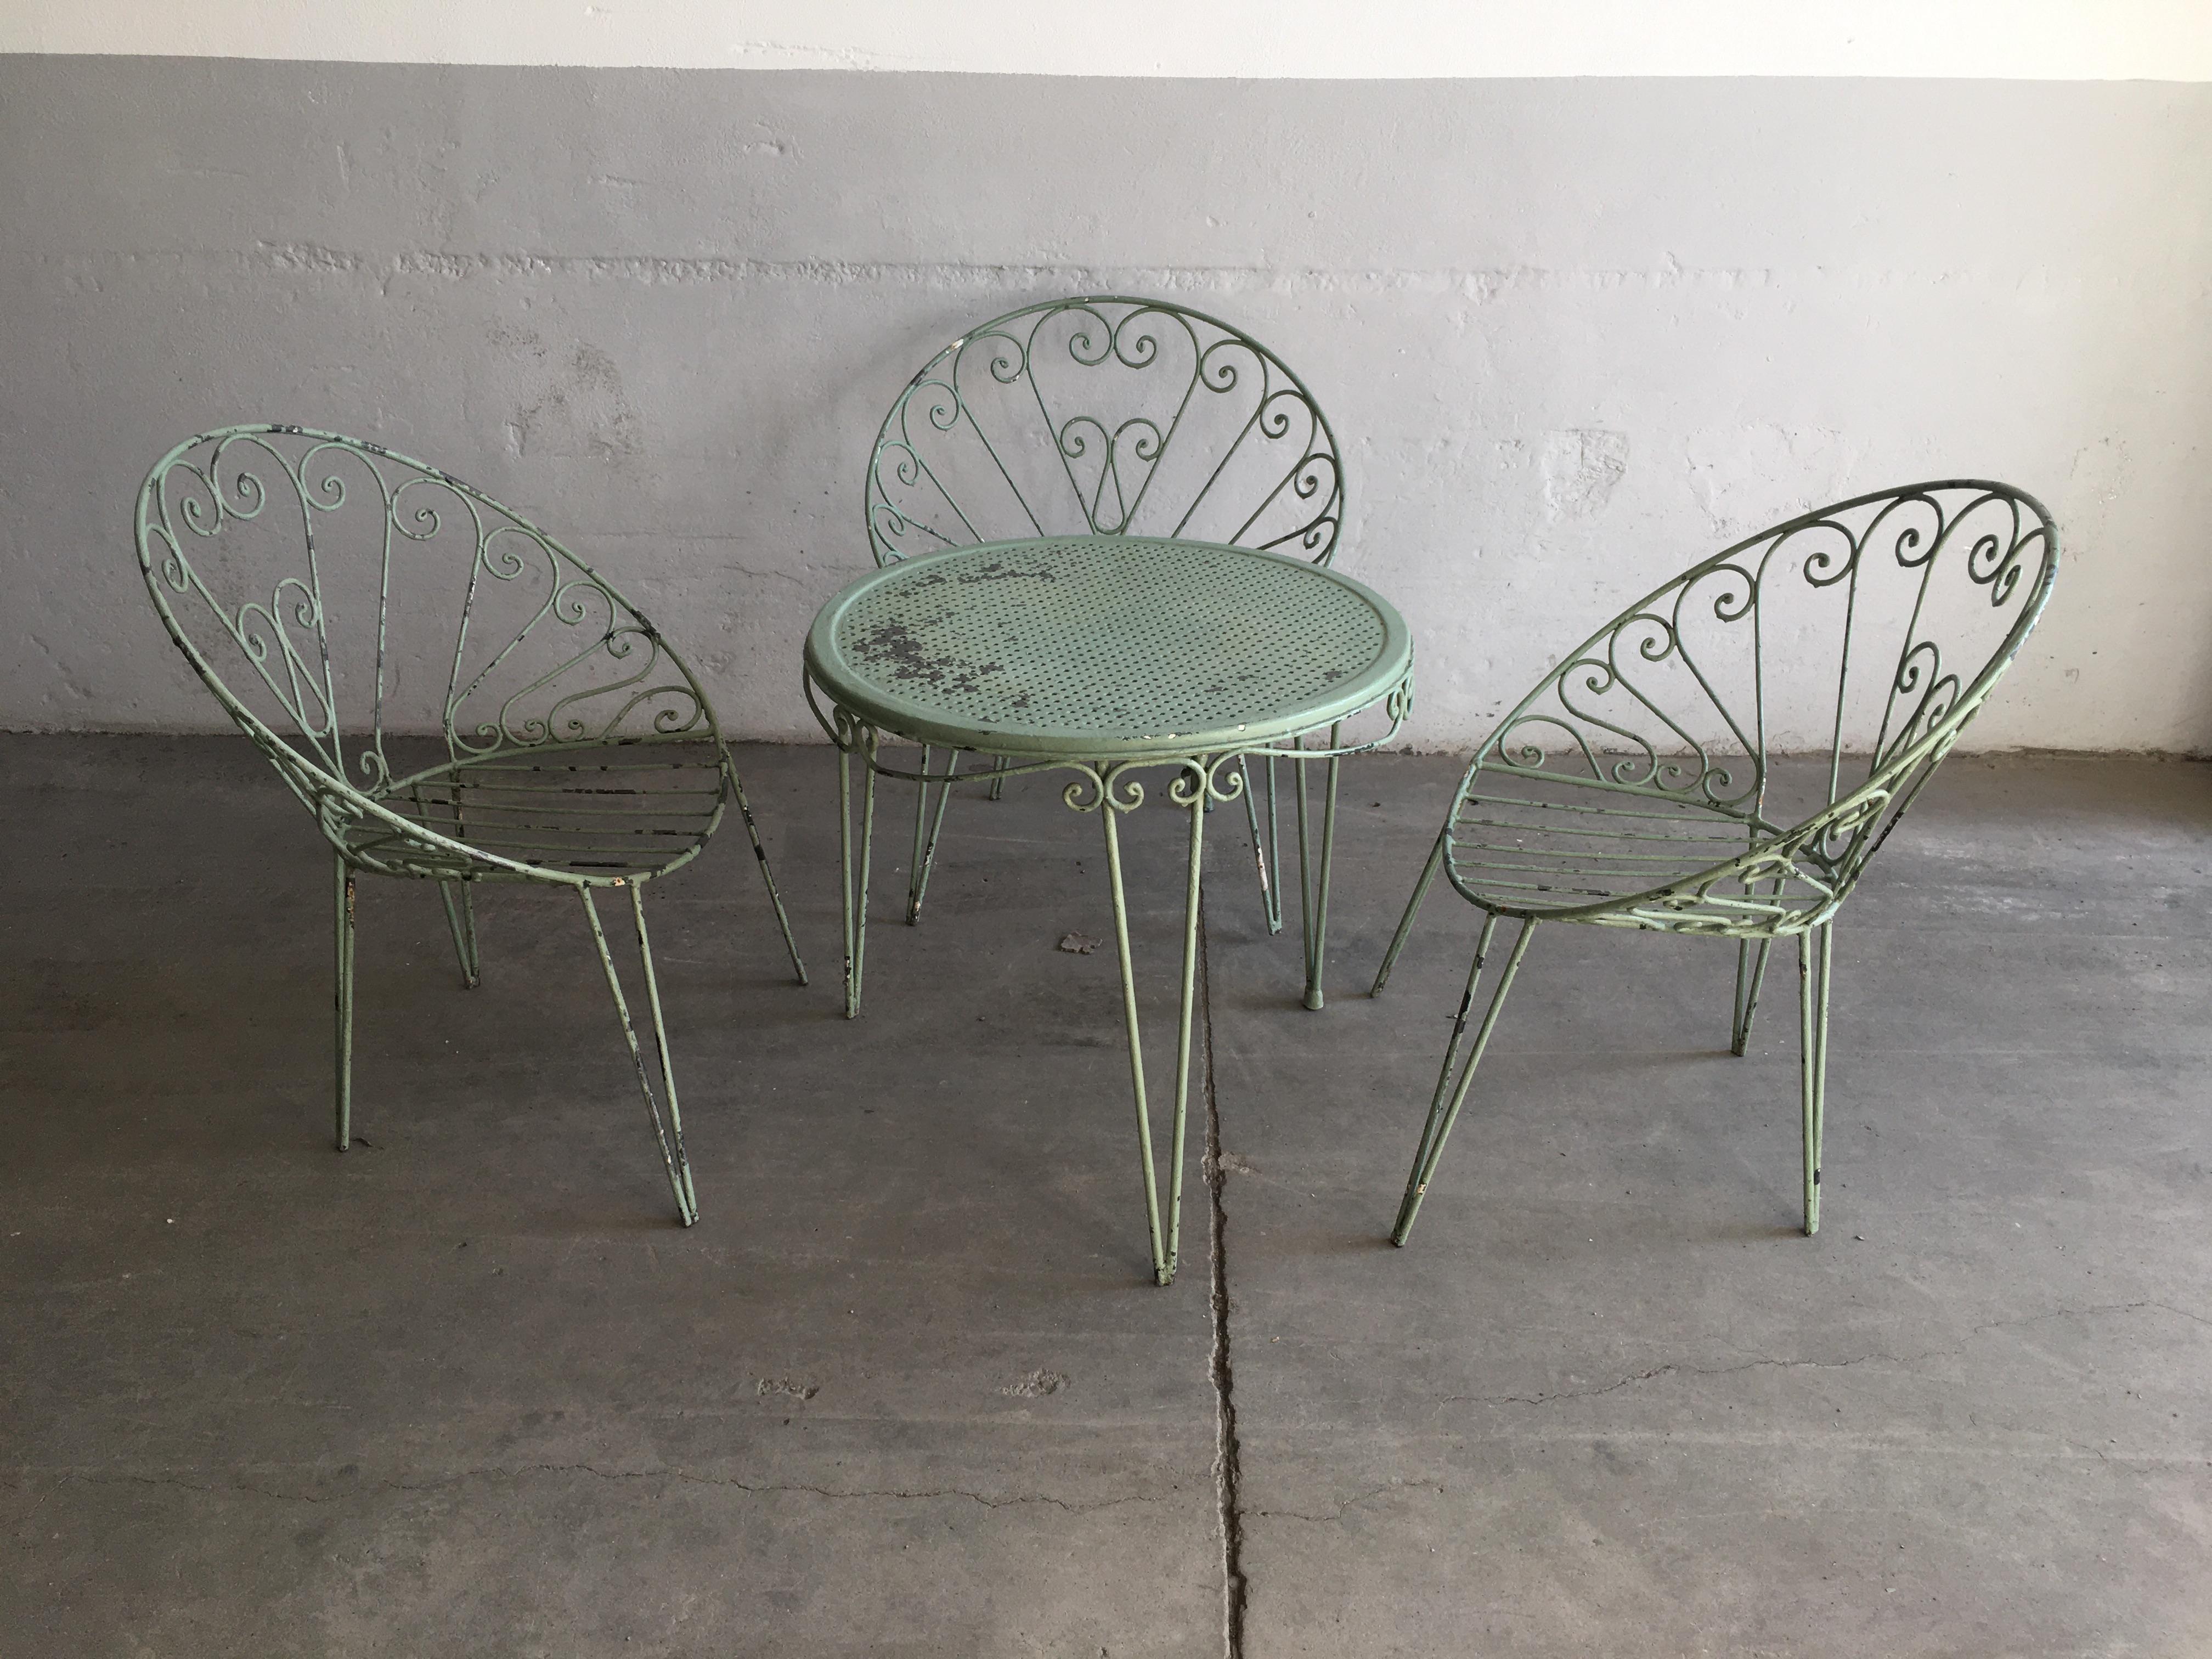 Mid-Century Modern Italian iron painted garden set, 1960s
The set consist in 1 table and 4 chairs
Measurements: Table D. cm. 64 x H. cm. 60 - Chairs cm. 67 x 57 x H. 77-35 each.